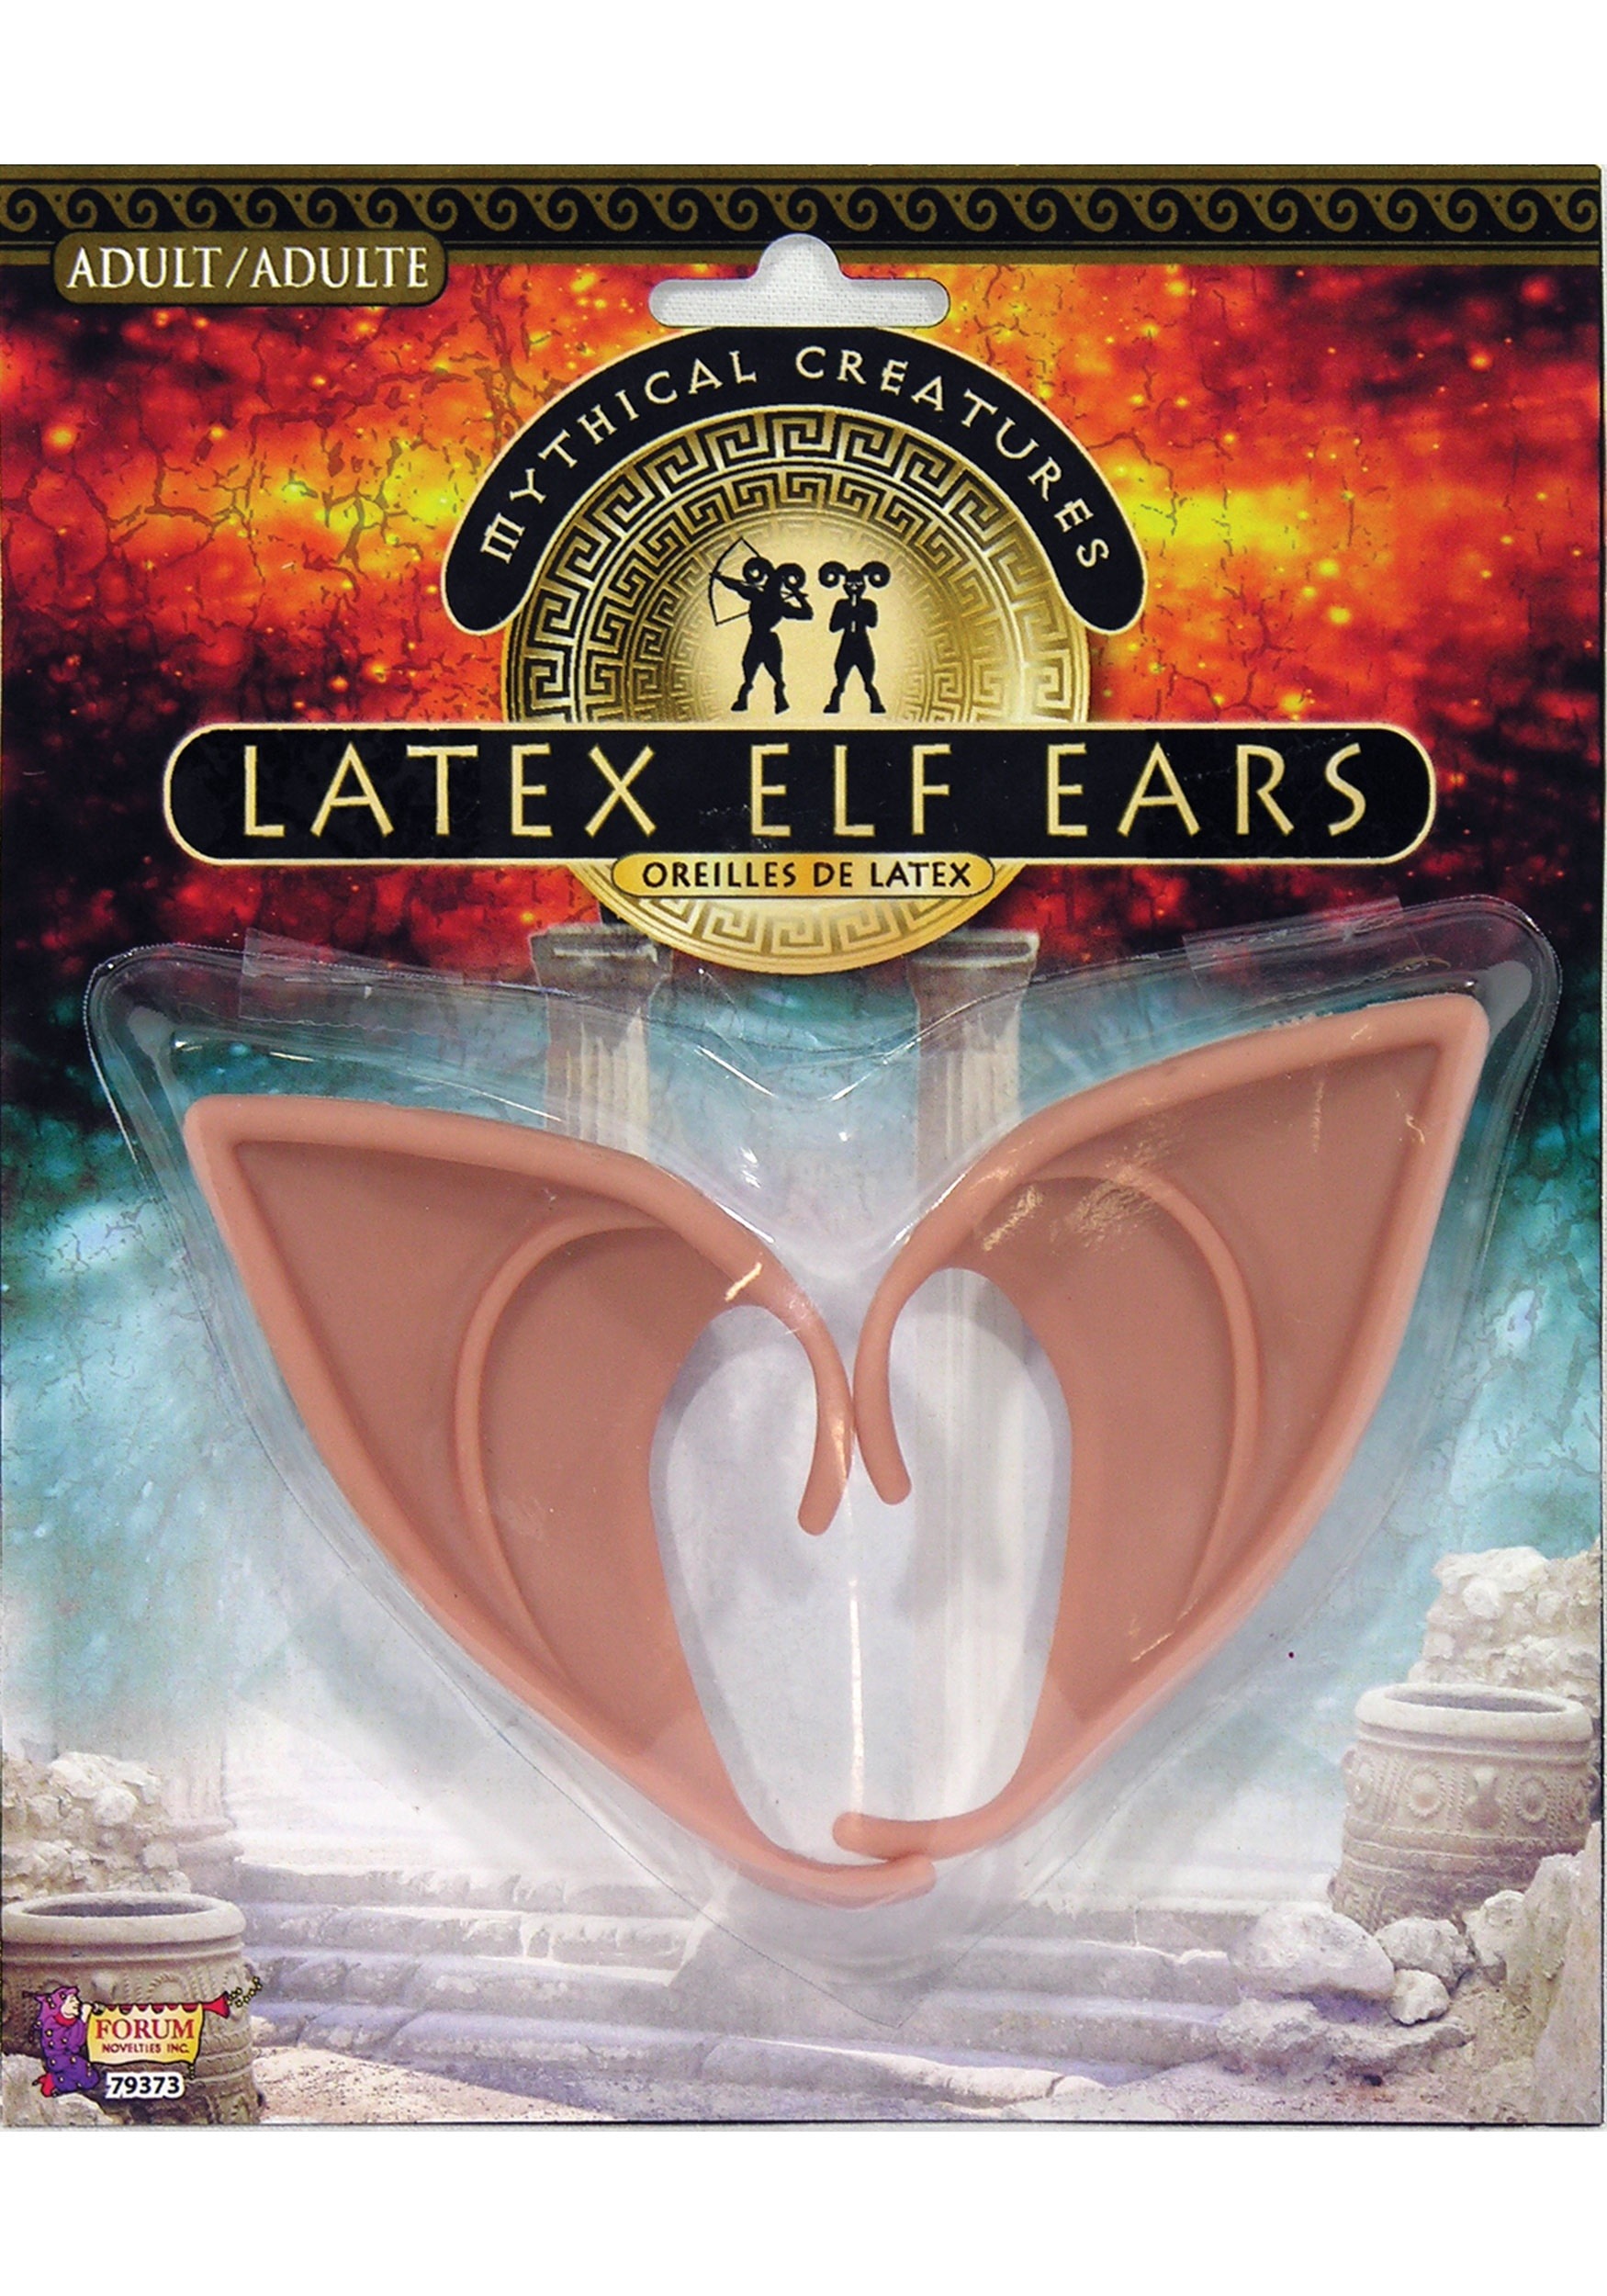 Pointed latex ears fit over your ears Pieces attach with included spirit gum adhesive Spirit gum remover included for easy removal Instructions included